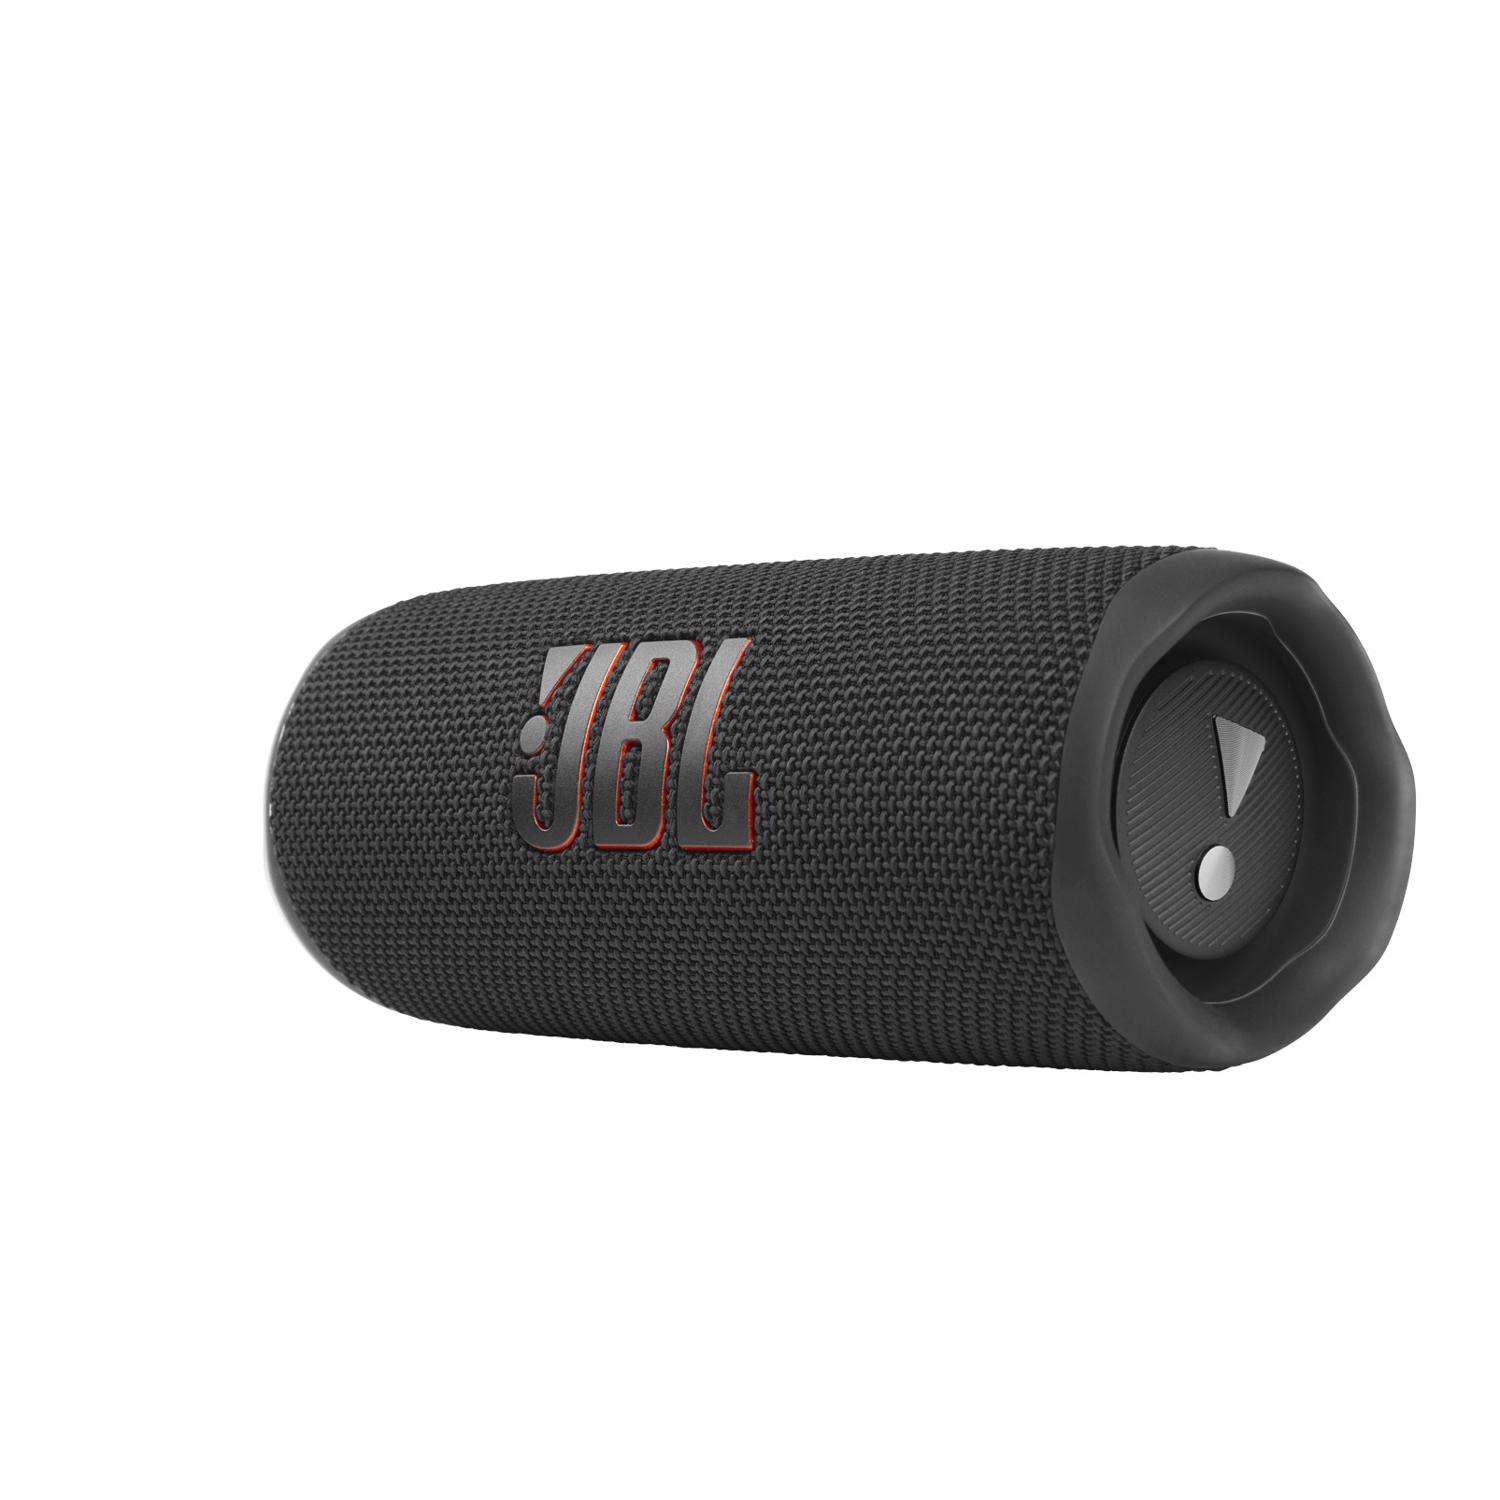  JBL Charge 5 - Portable Bluetooth Speaker with IP67 Waterproof  and USB Charge Out - Blue (Renewed) : Electronics